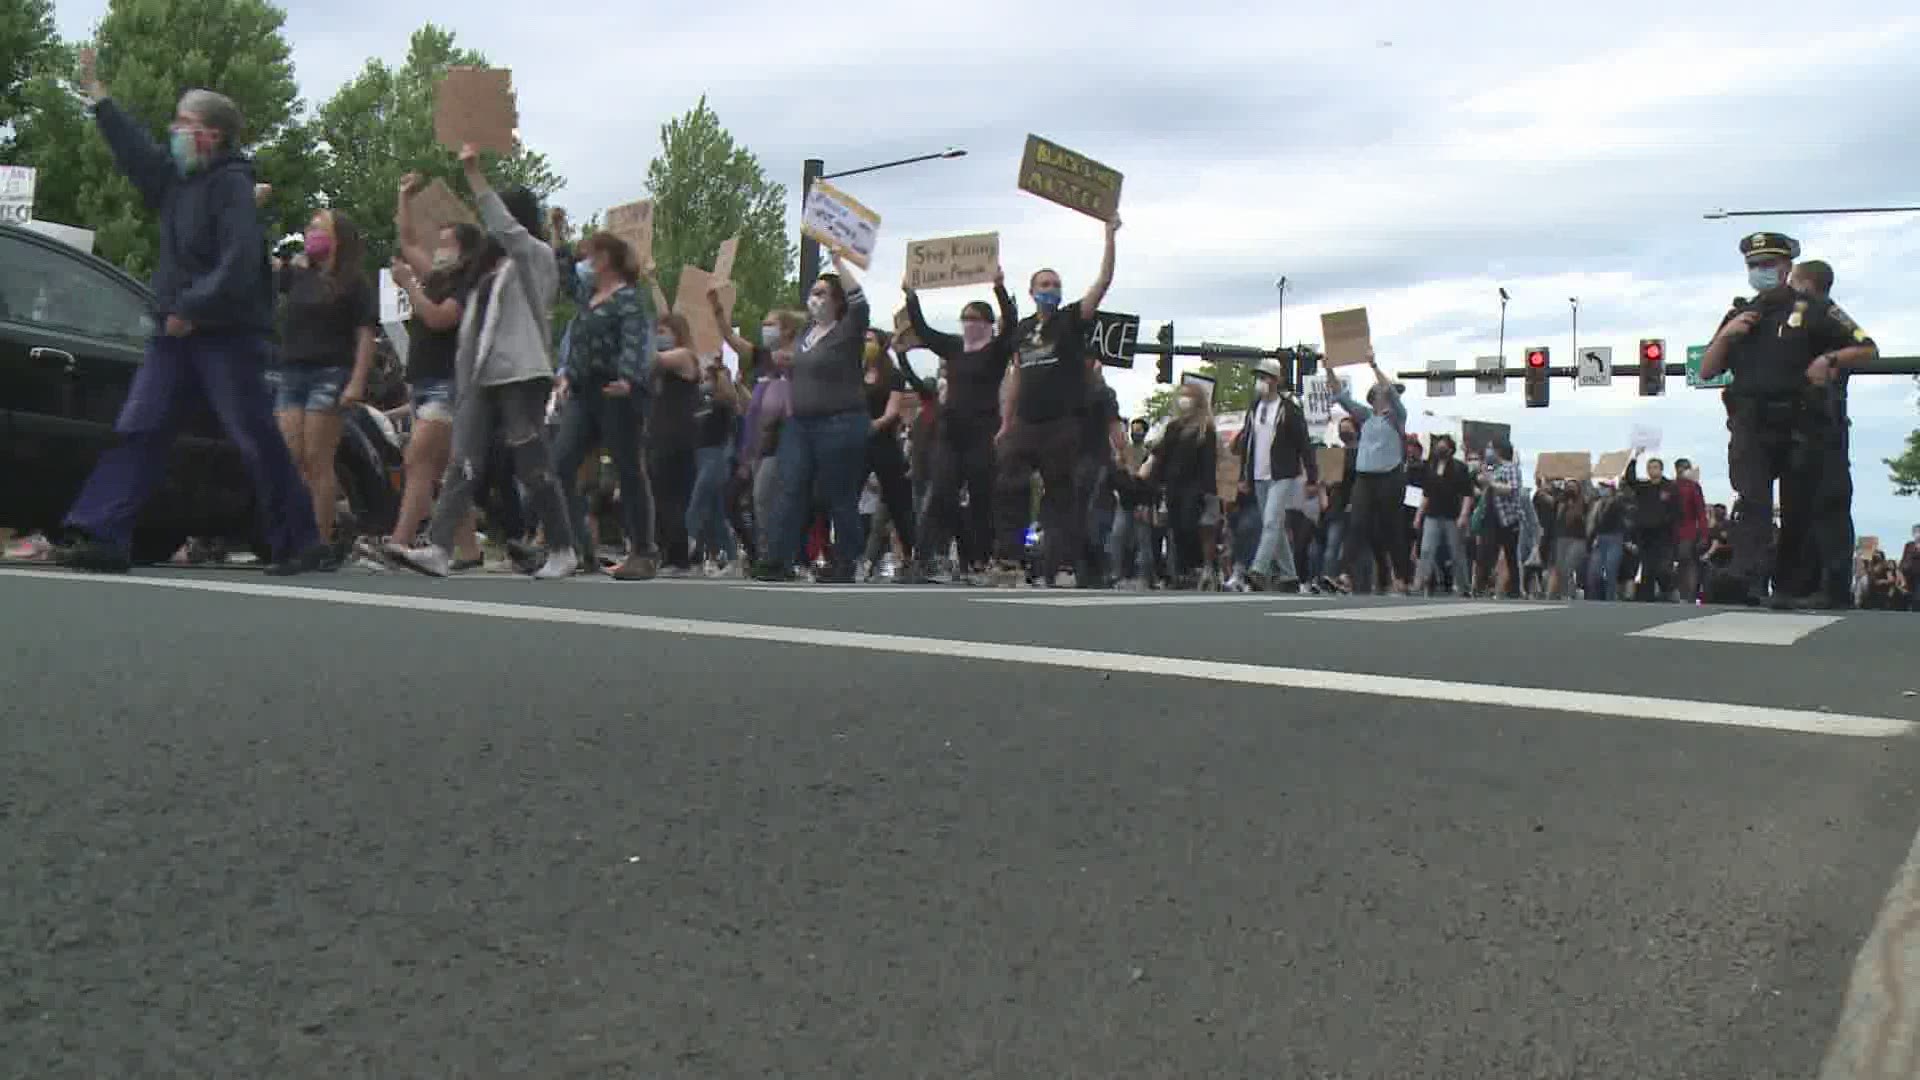 Organizers say the conversations could push Connecticut to heal even more from incidents of police brutality.